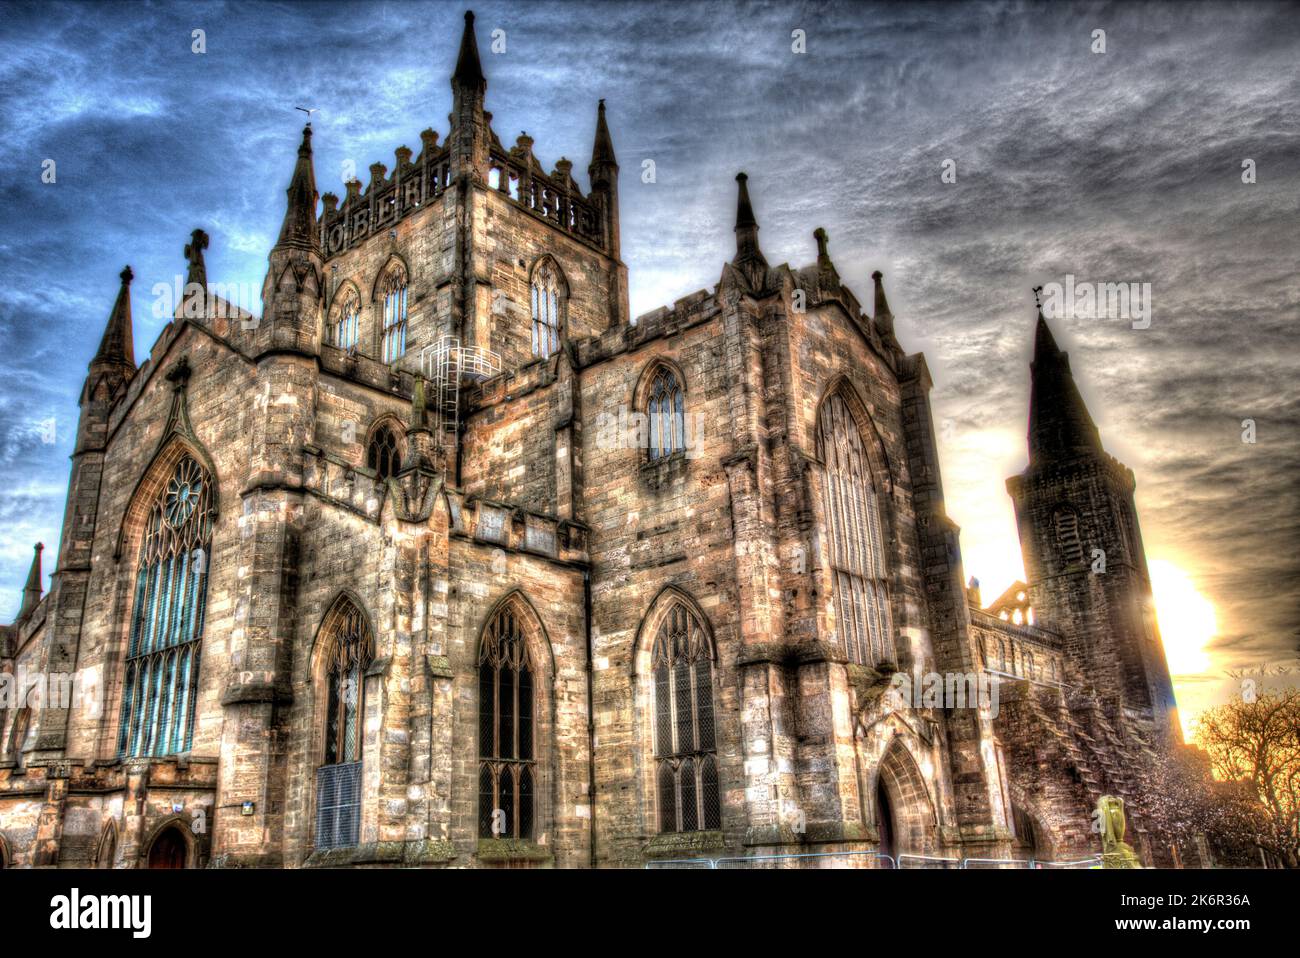 City of Dunfermline, Scotland. Artistic view of the northern façade of Dunfermline Abbey. Stock Photo